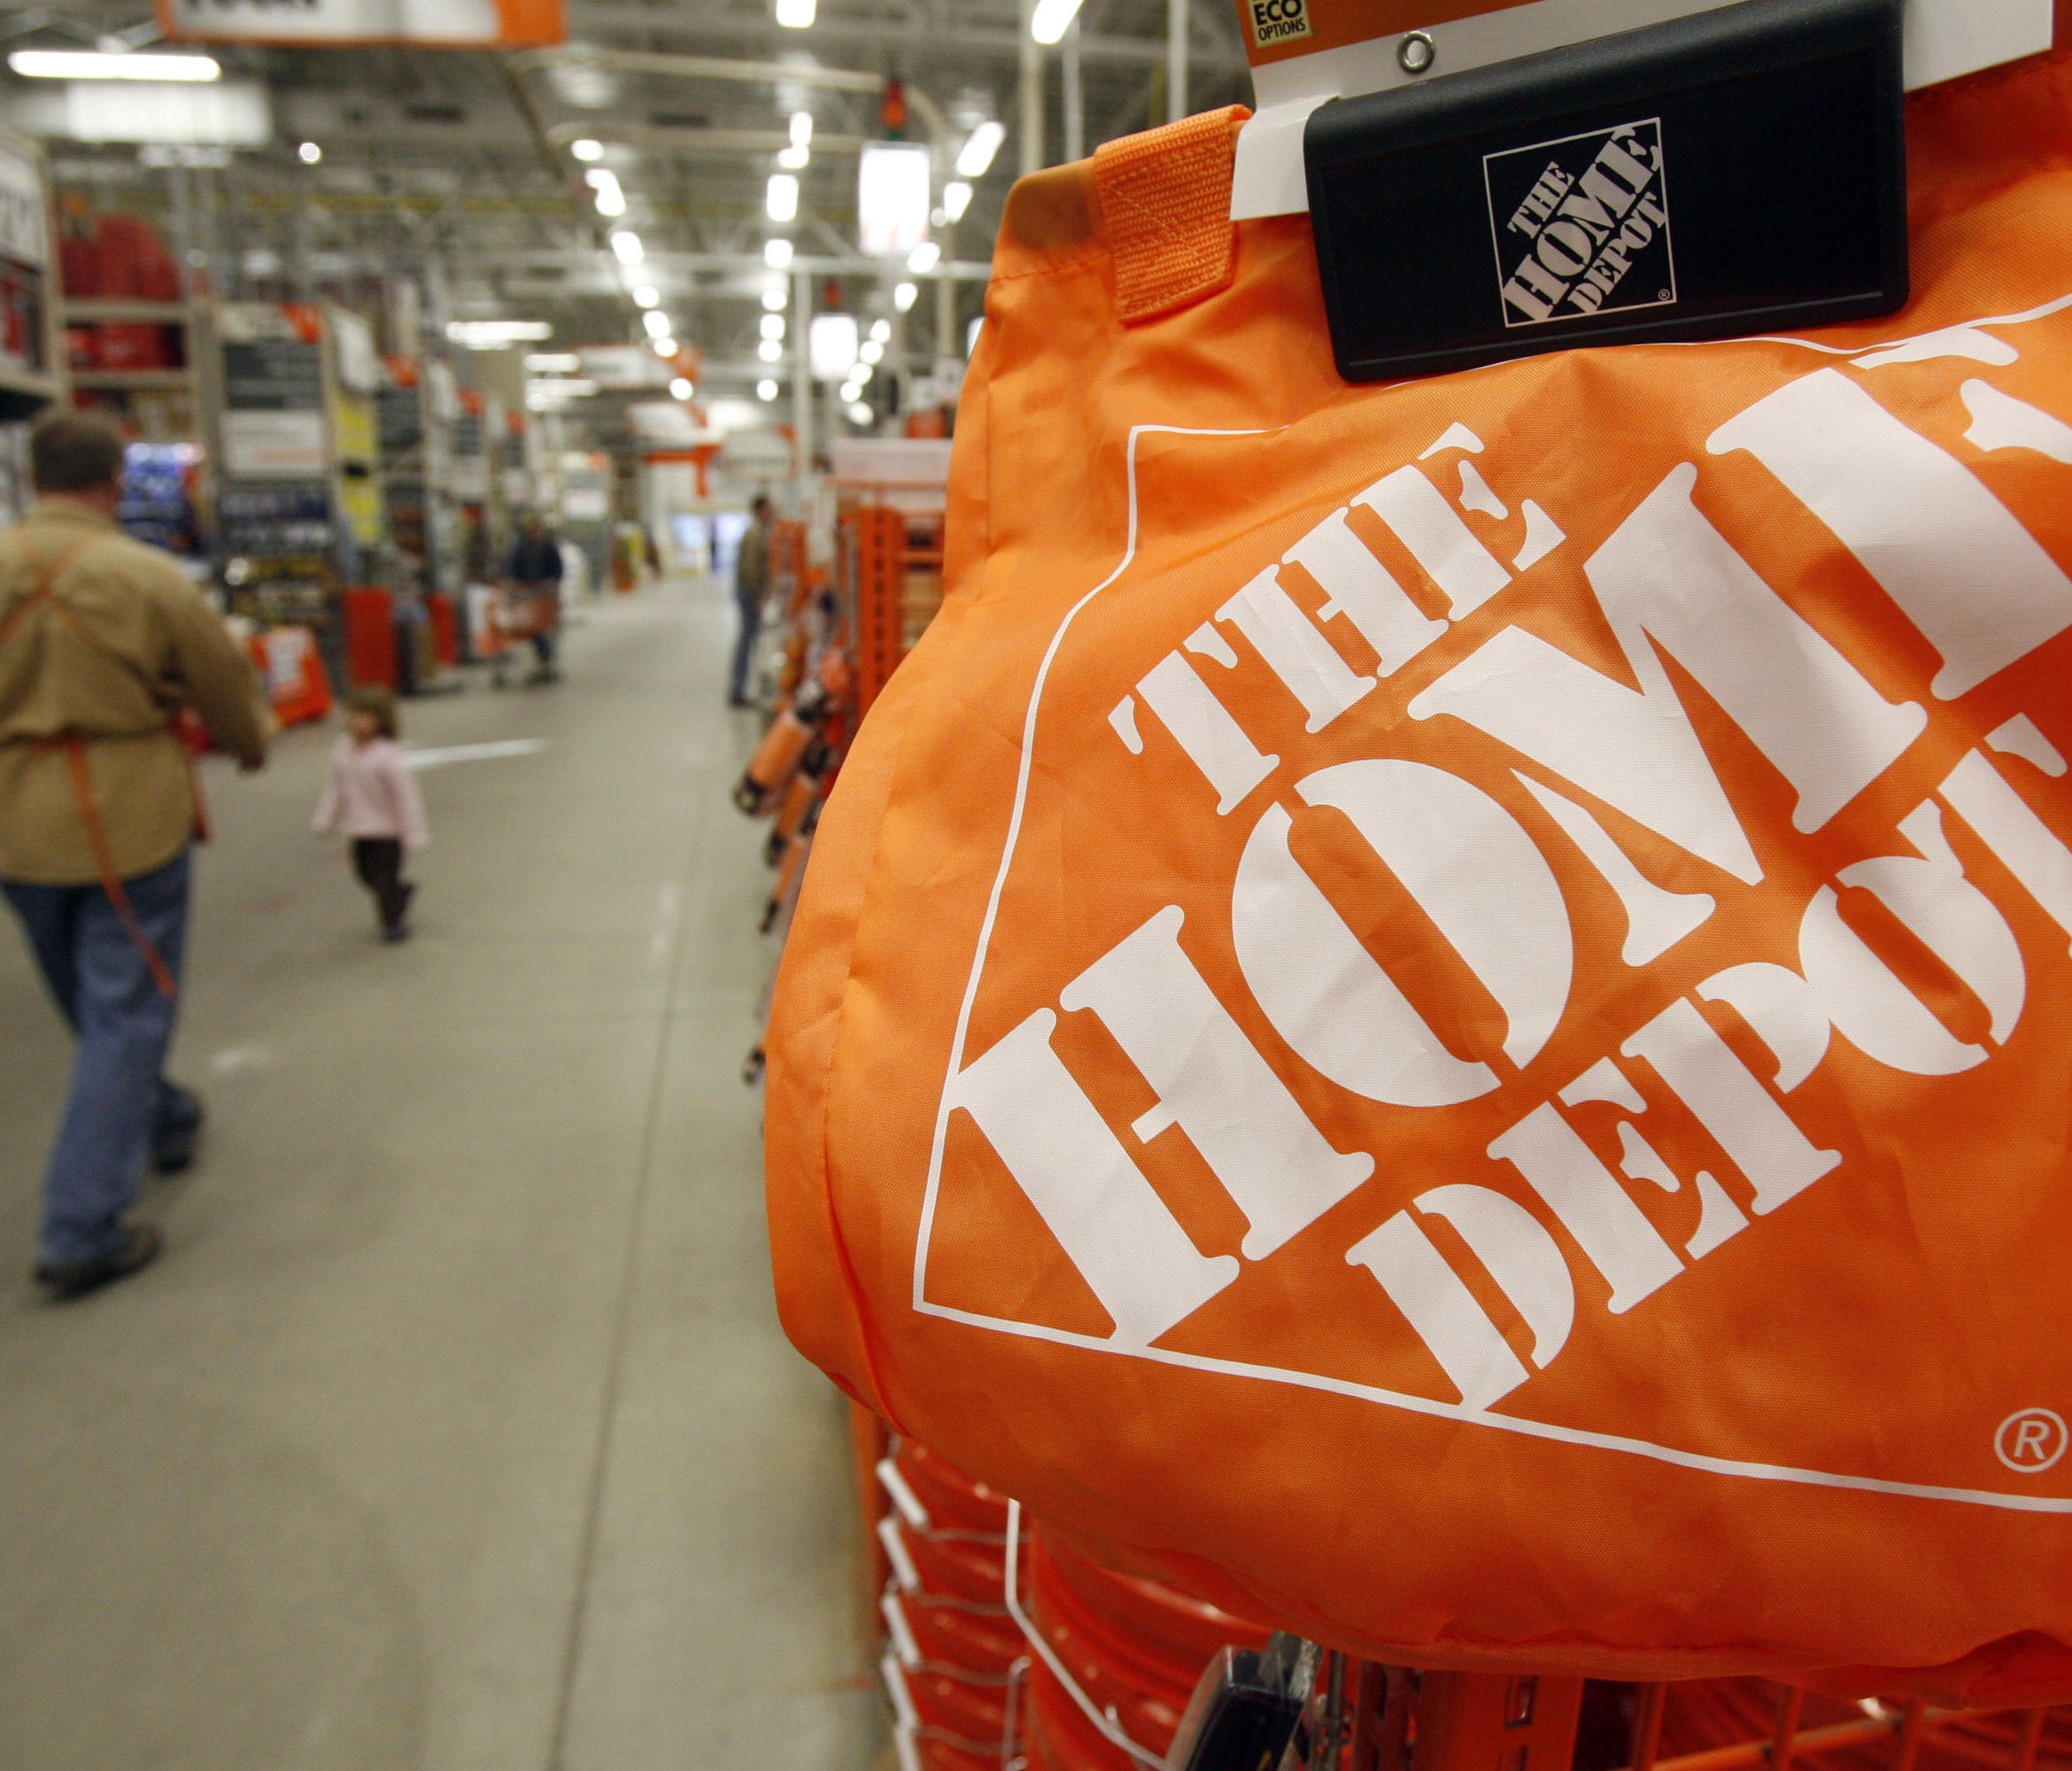 Active-duty military and veterans are eligible for Hone Depot's military discount on Memorial Day.